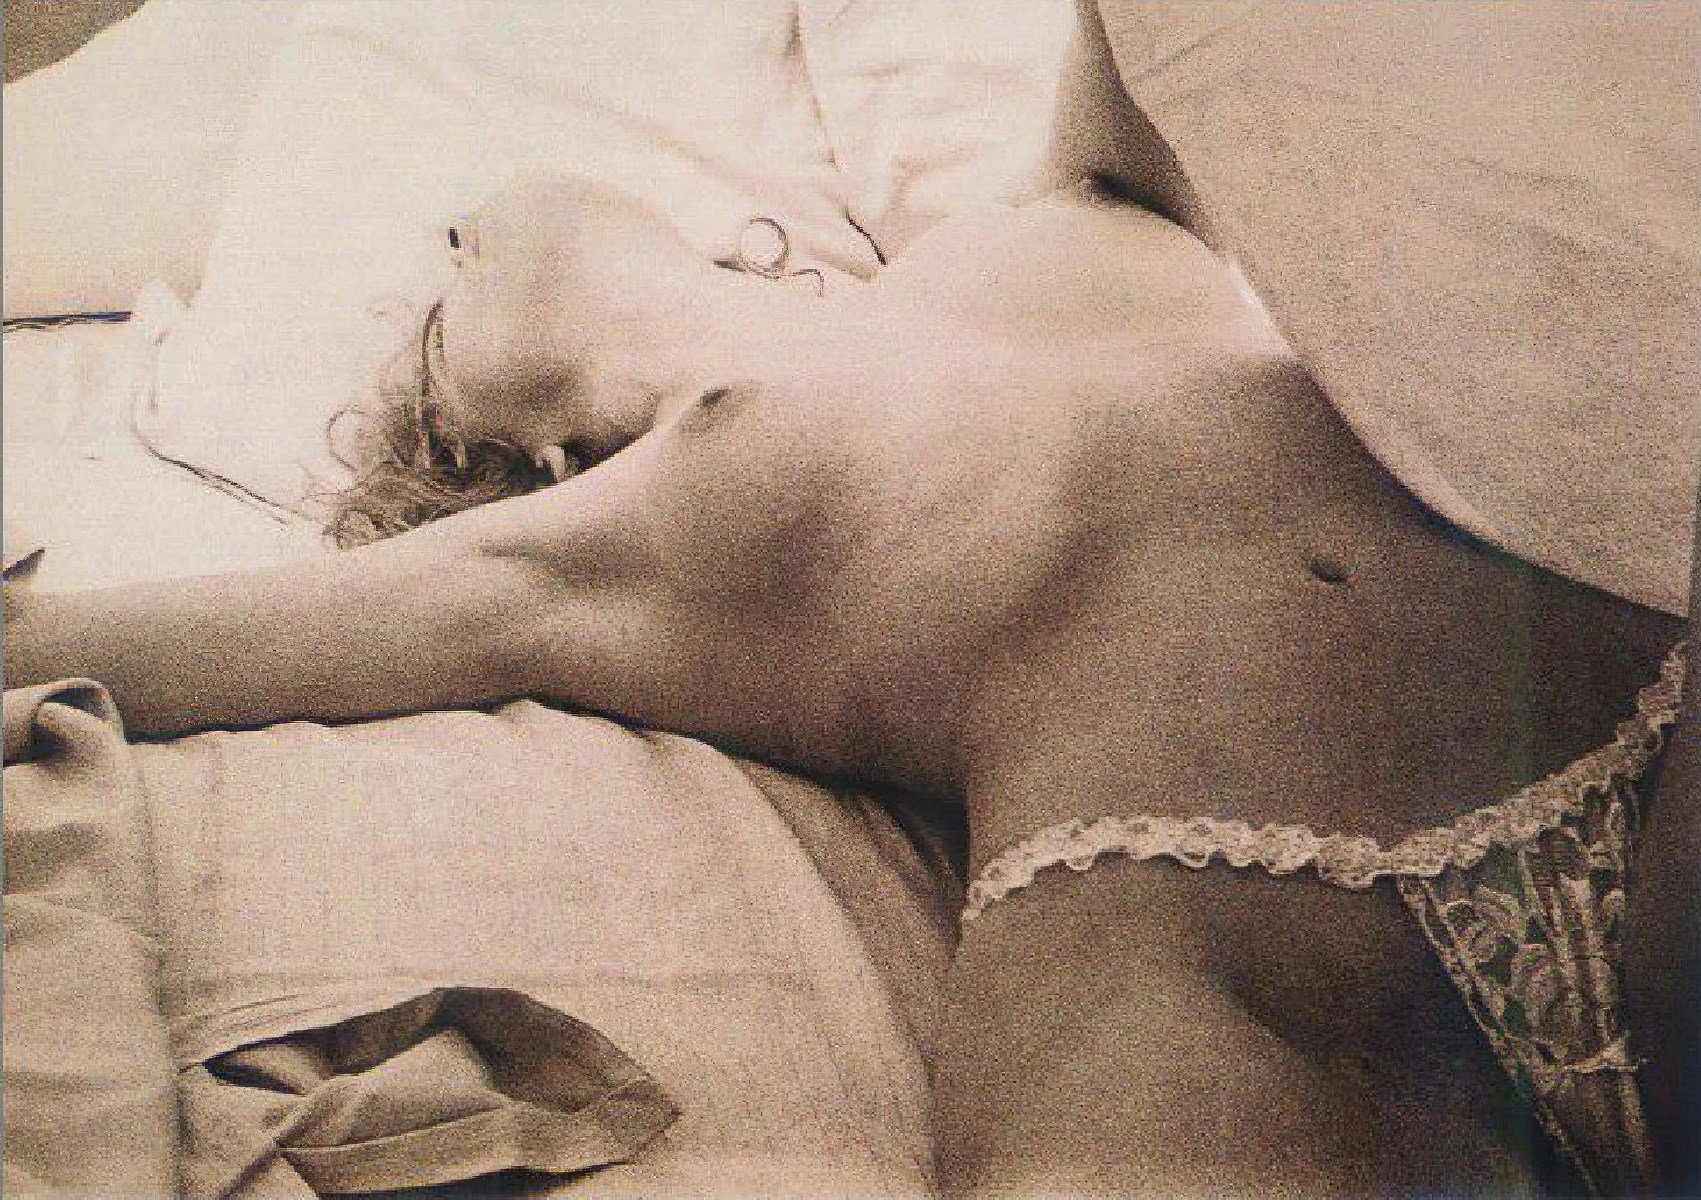 A Young Sharon Stone Nude